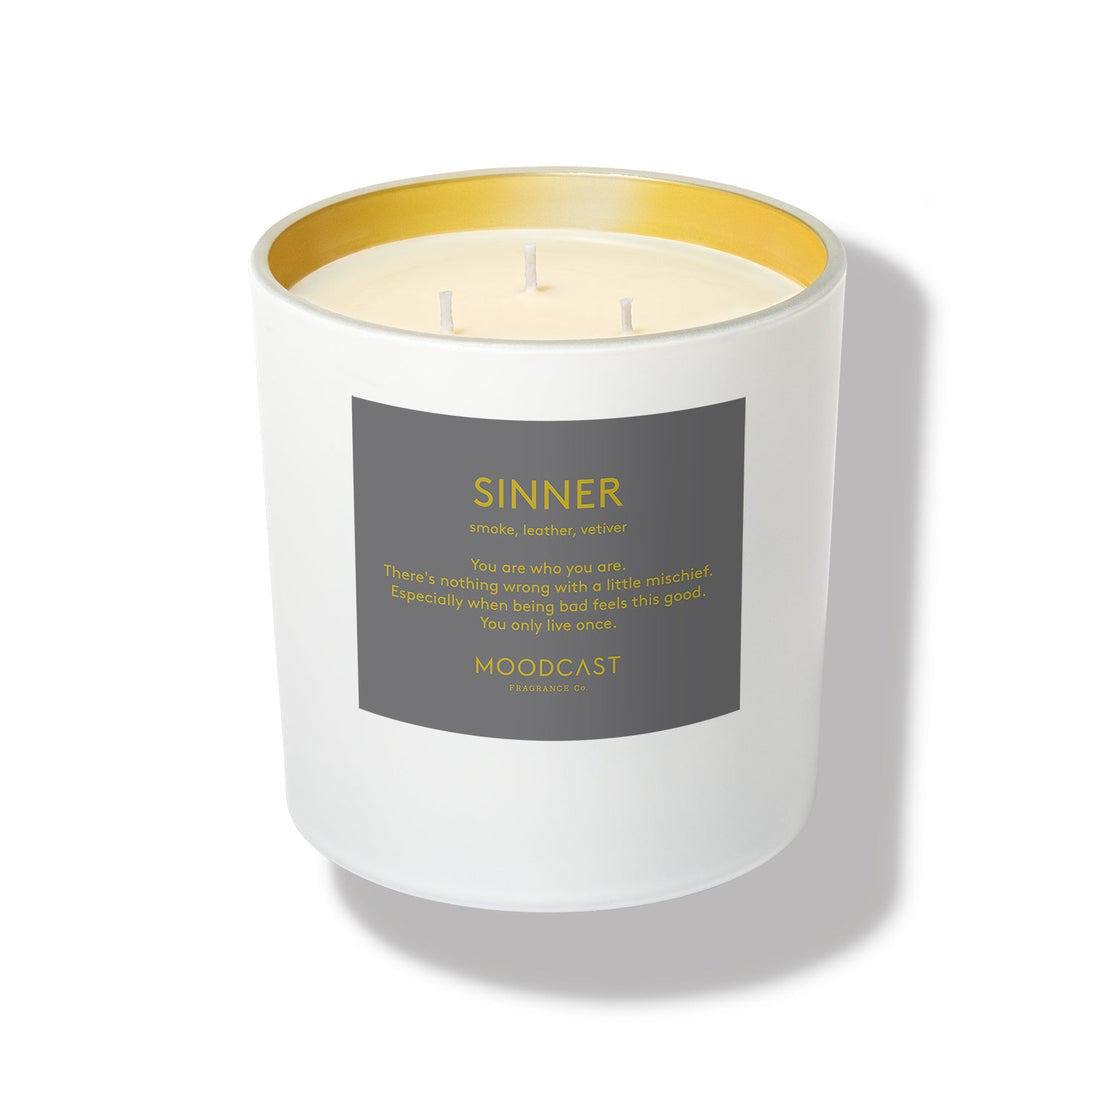 Sinner - Persona Collection (White & Gold) - 24oz/680g Coconut Wax Blend Glass Jar 3-Wick Candle - Key Notes: Smoke, Leather, Vetiver